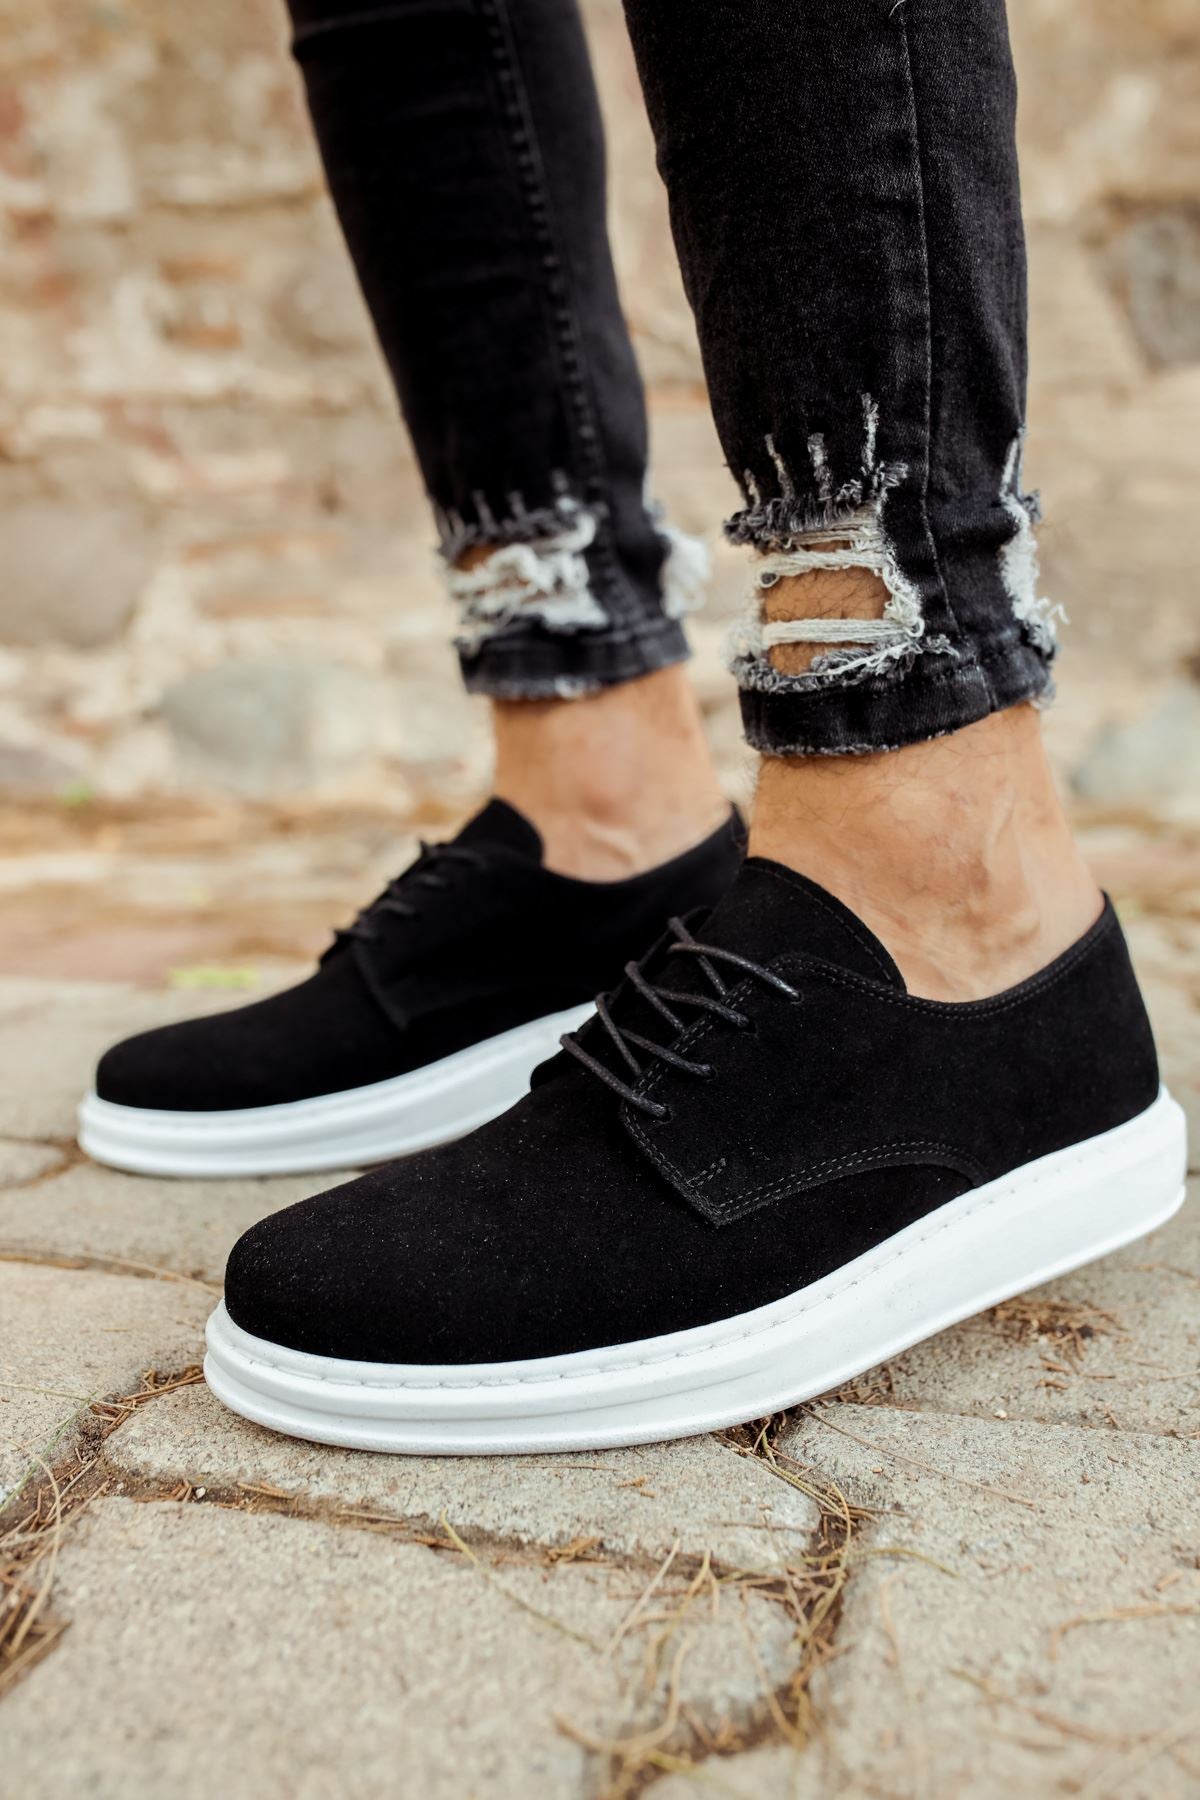 CH003 Suede BT Men's Sneaker Casual Shoes Black - STREETMODE™